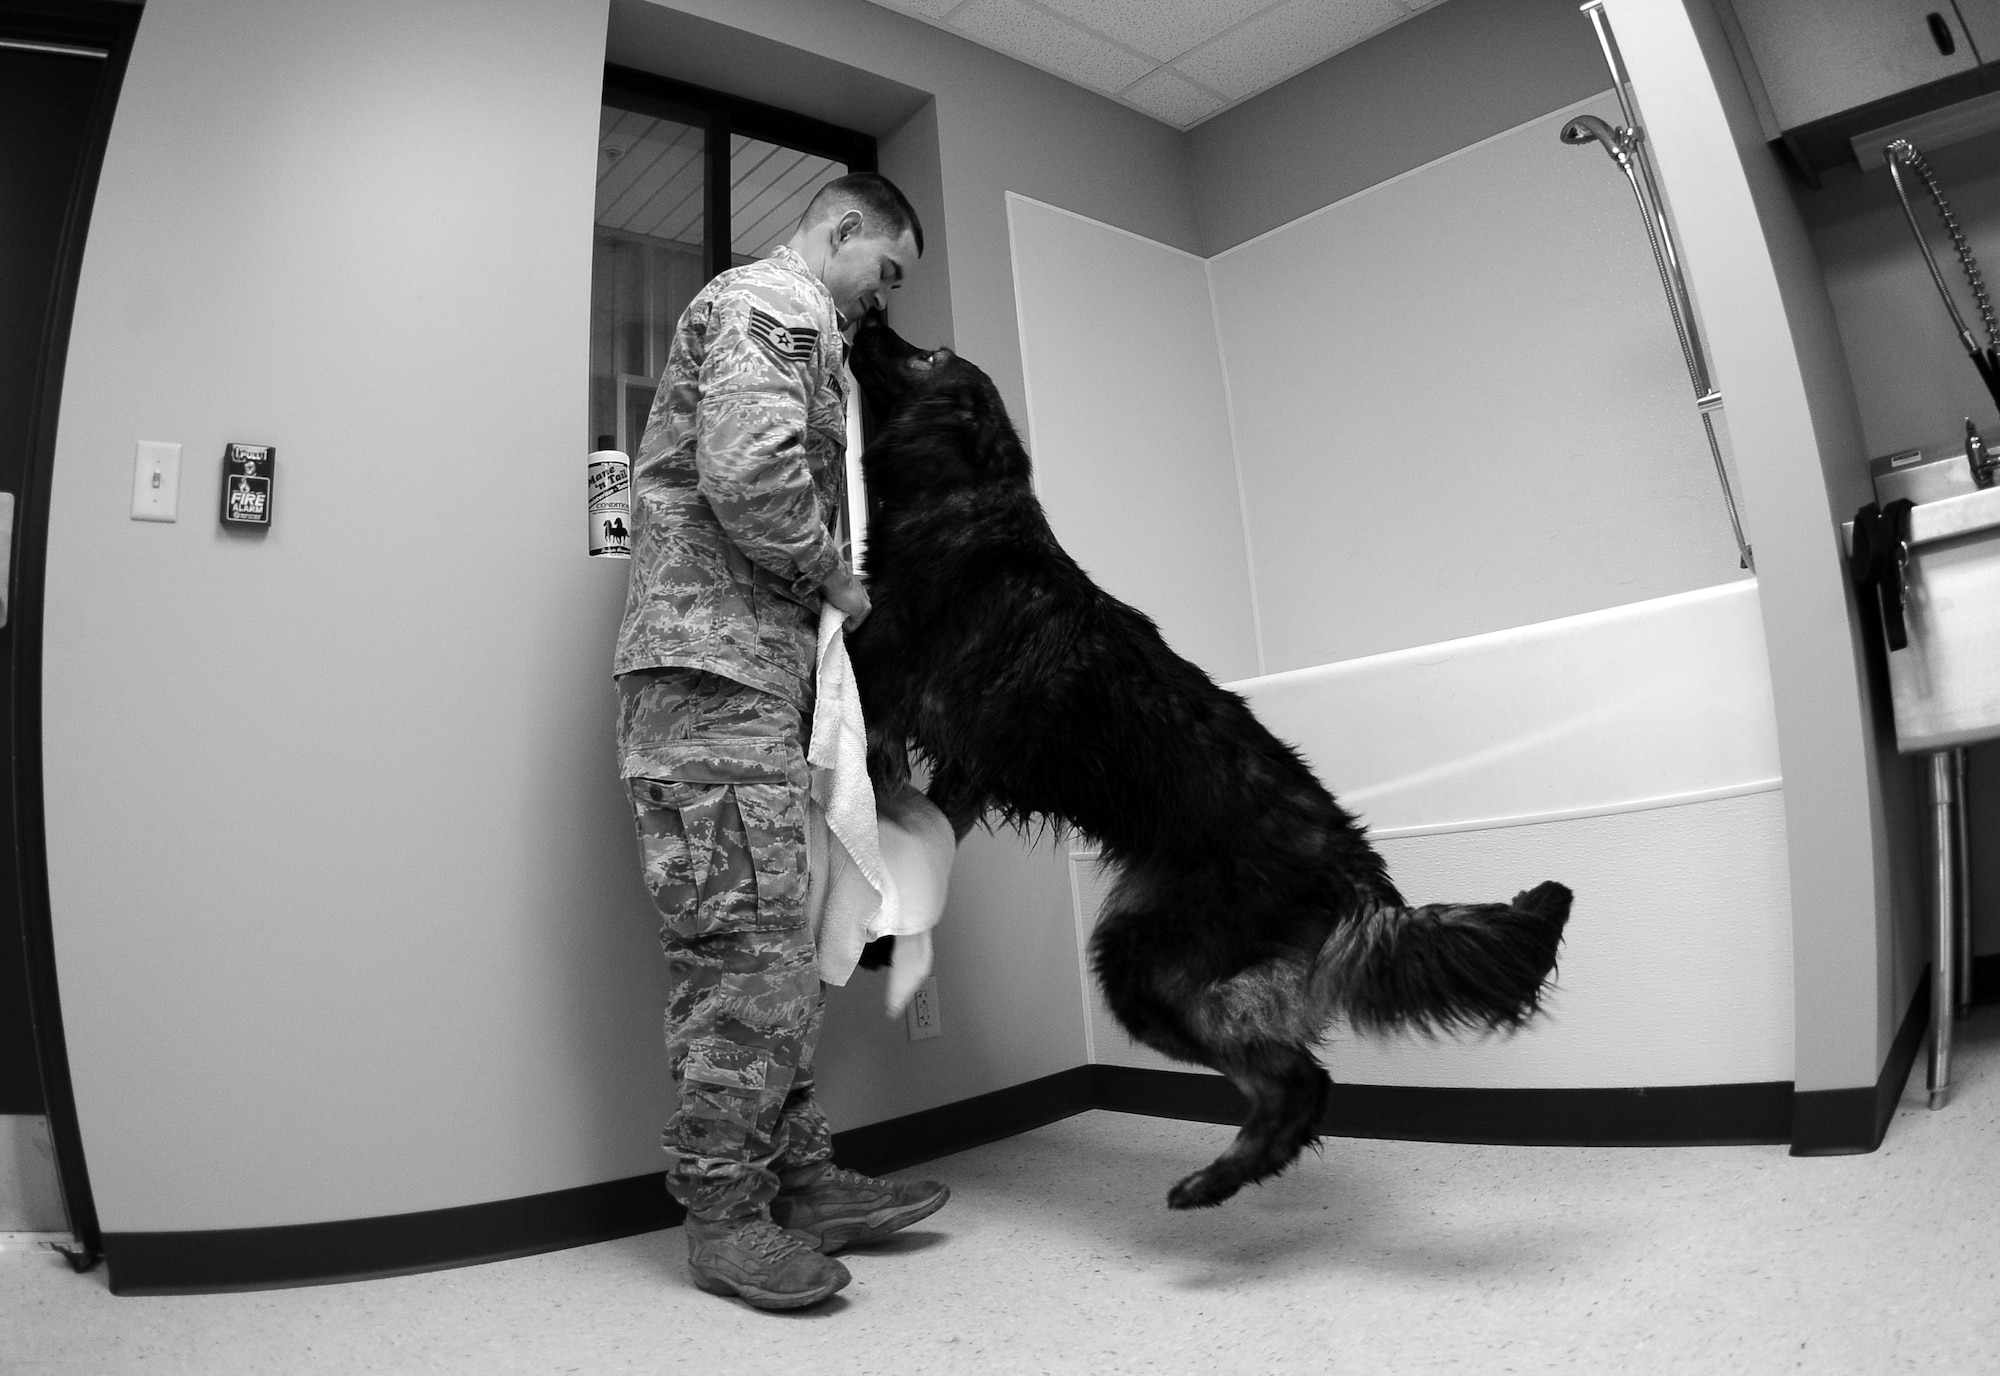 OFFUTT AIR FORCE BASE, Neb. - Dasty, a three-year-old Belgian Tervuren, jumps to greet his partner, Staff Sgt. Joel Therrien, a military working dog handler with the 55th Security Forces Squadron, after receiving his monthly bath.  Regular cleanings of the dogs and their kennels keep the dogs healthy and mission ready.   U.S. Air Force Photo by Josh Plueger (Released)